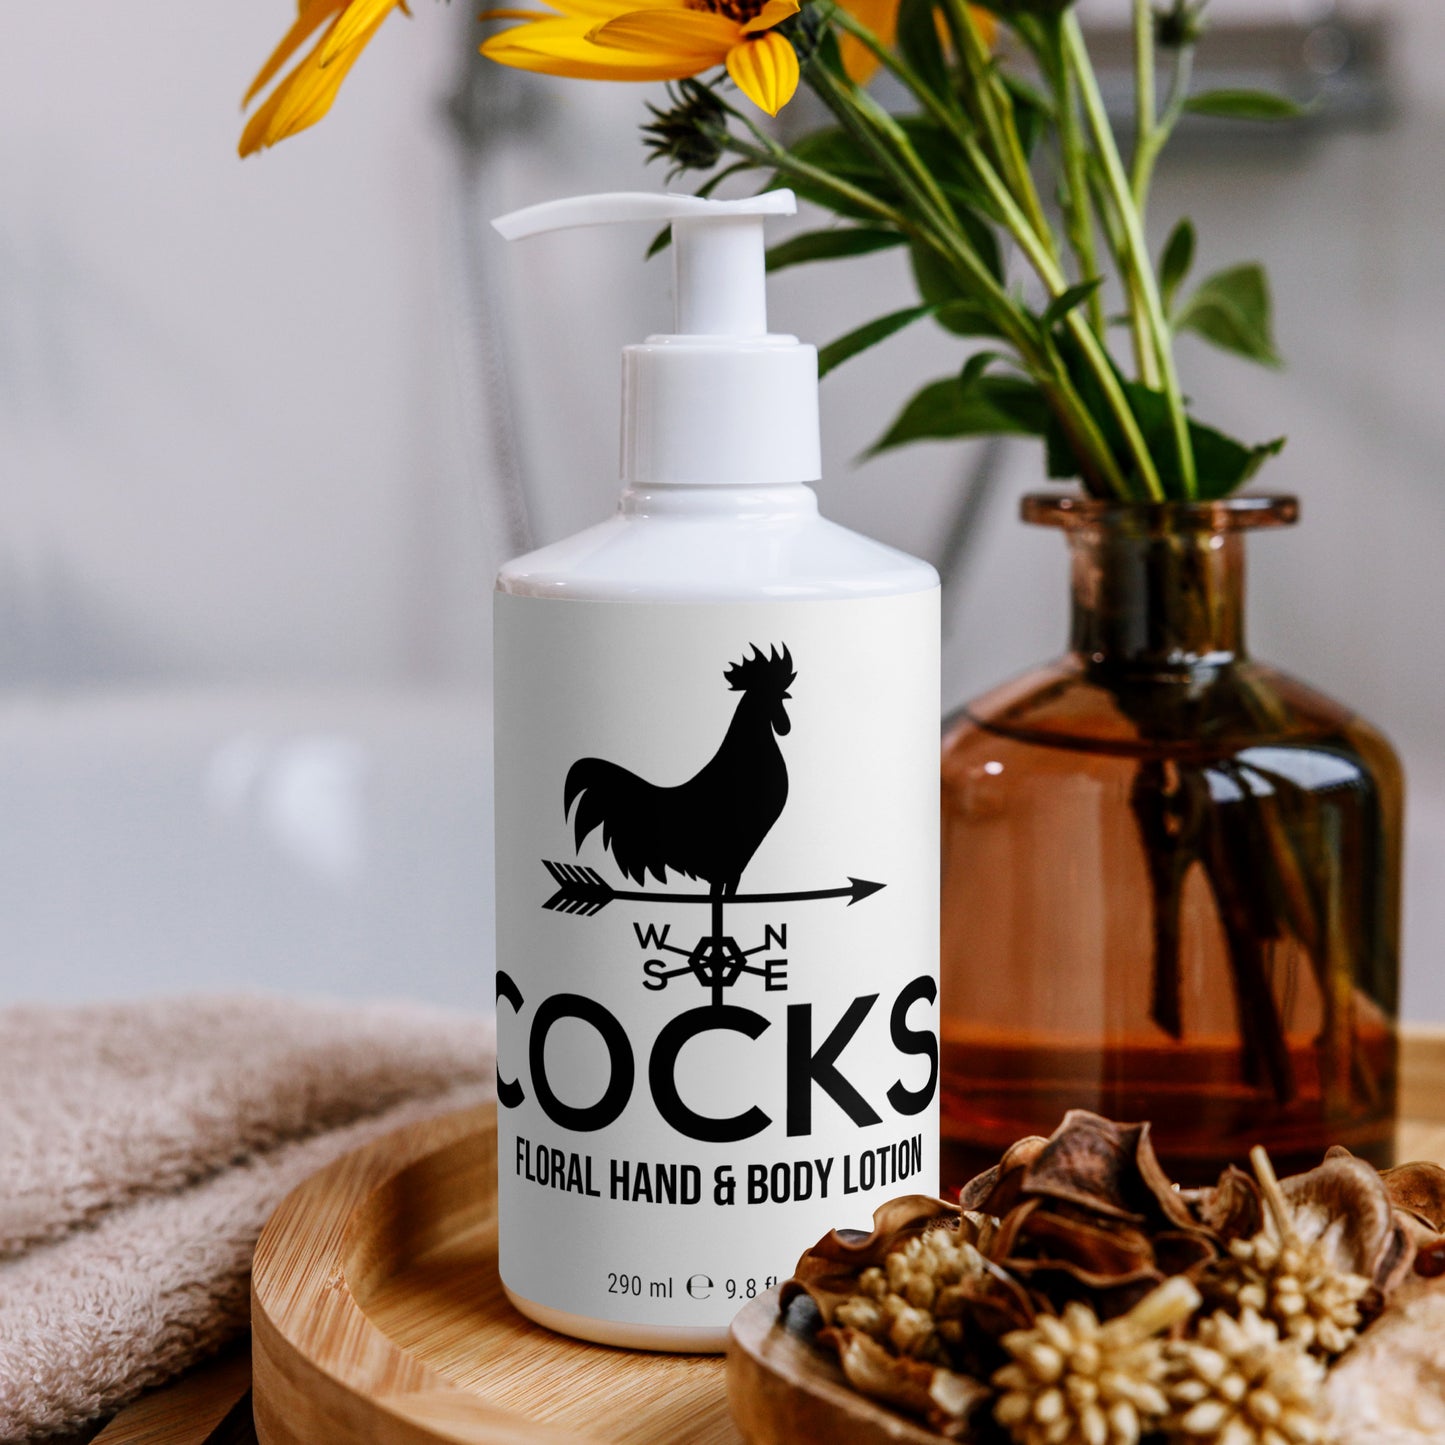 Cocks Floral Hand & Body Lotion